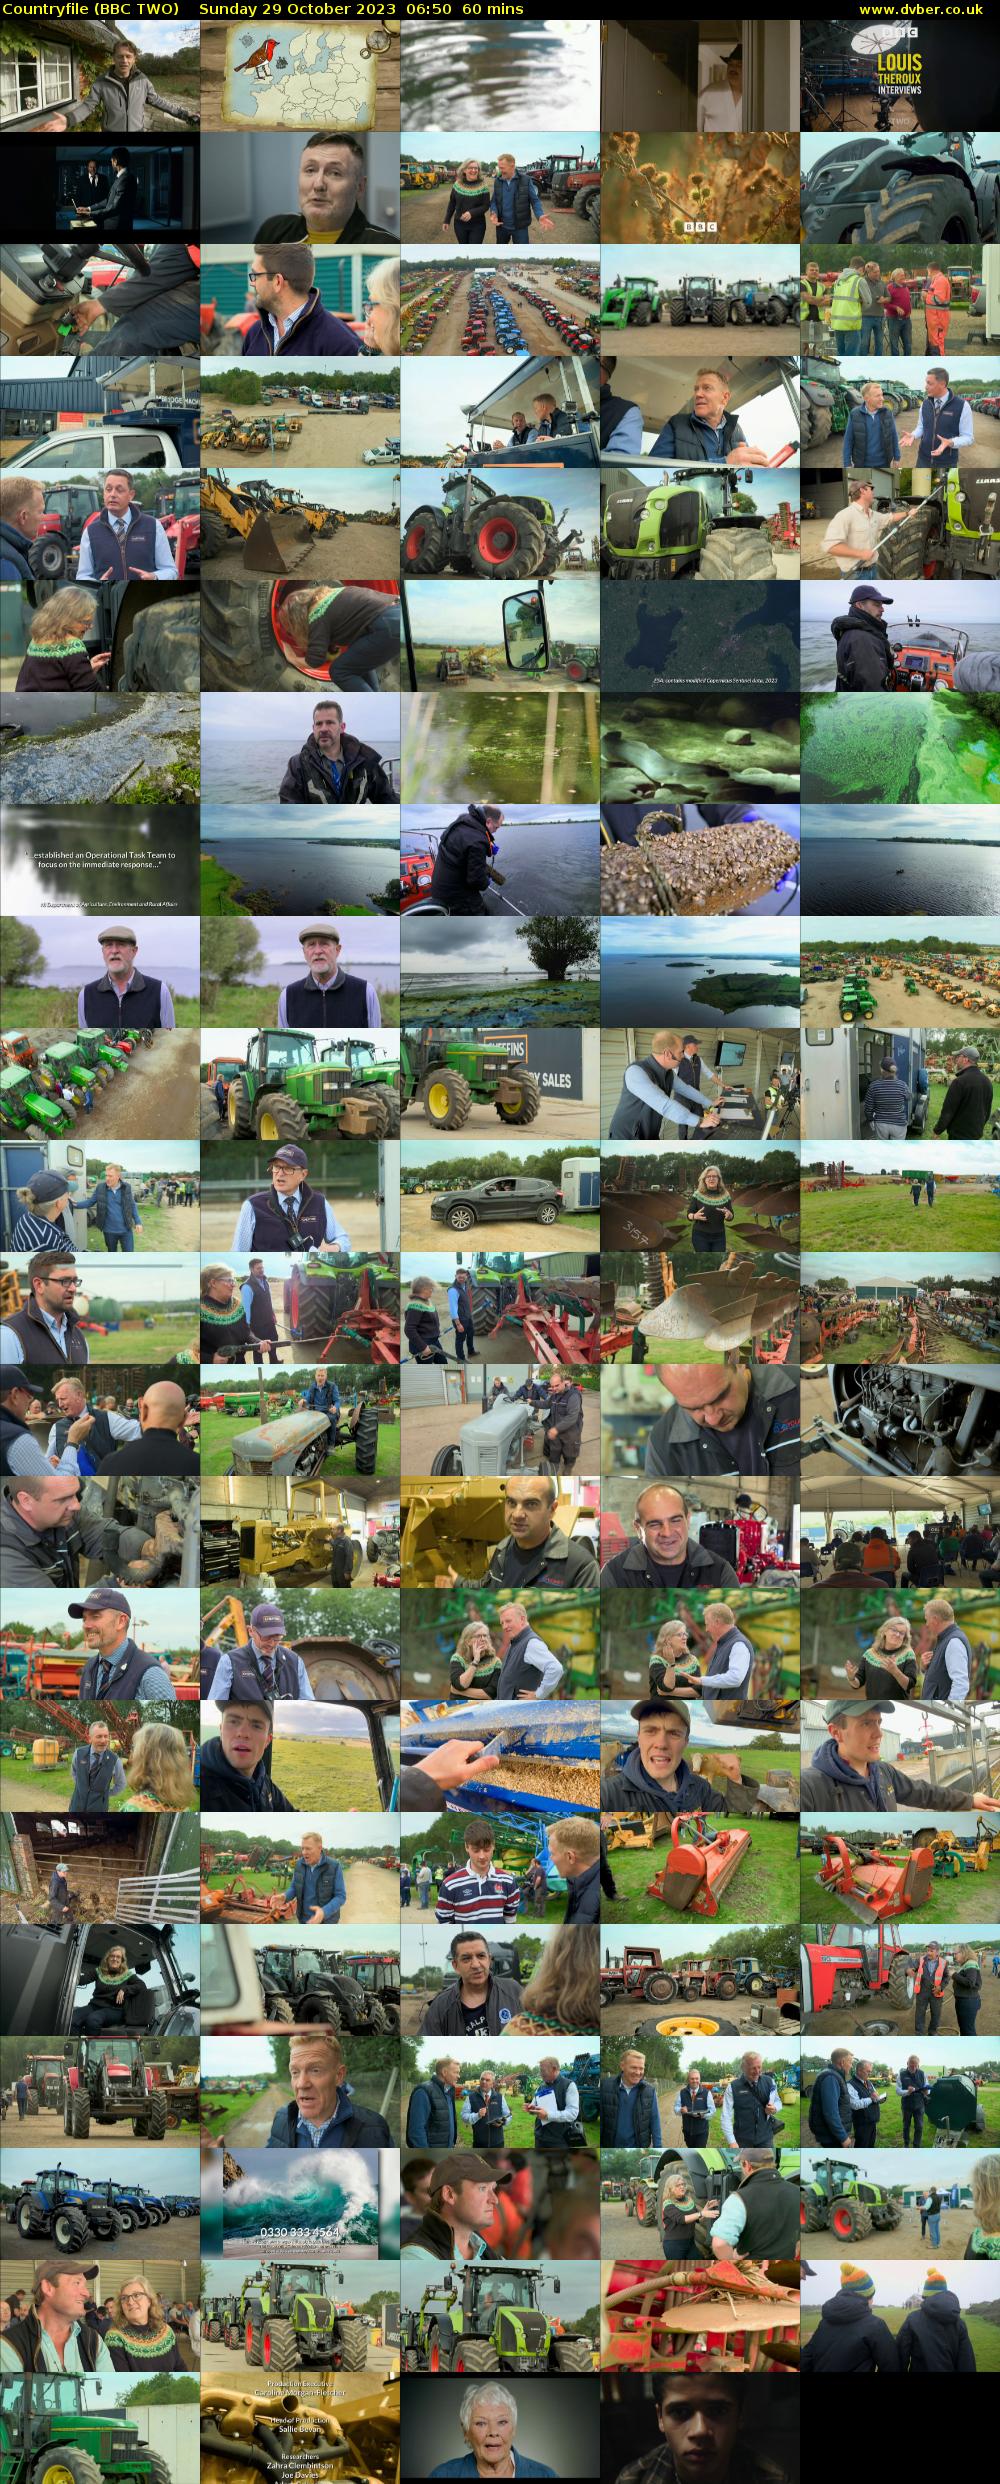 Countryfile (BBC TWO) Sunday 29 October 2023 06:50 - 07:50